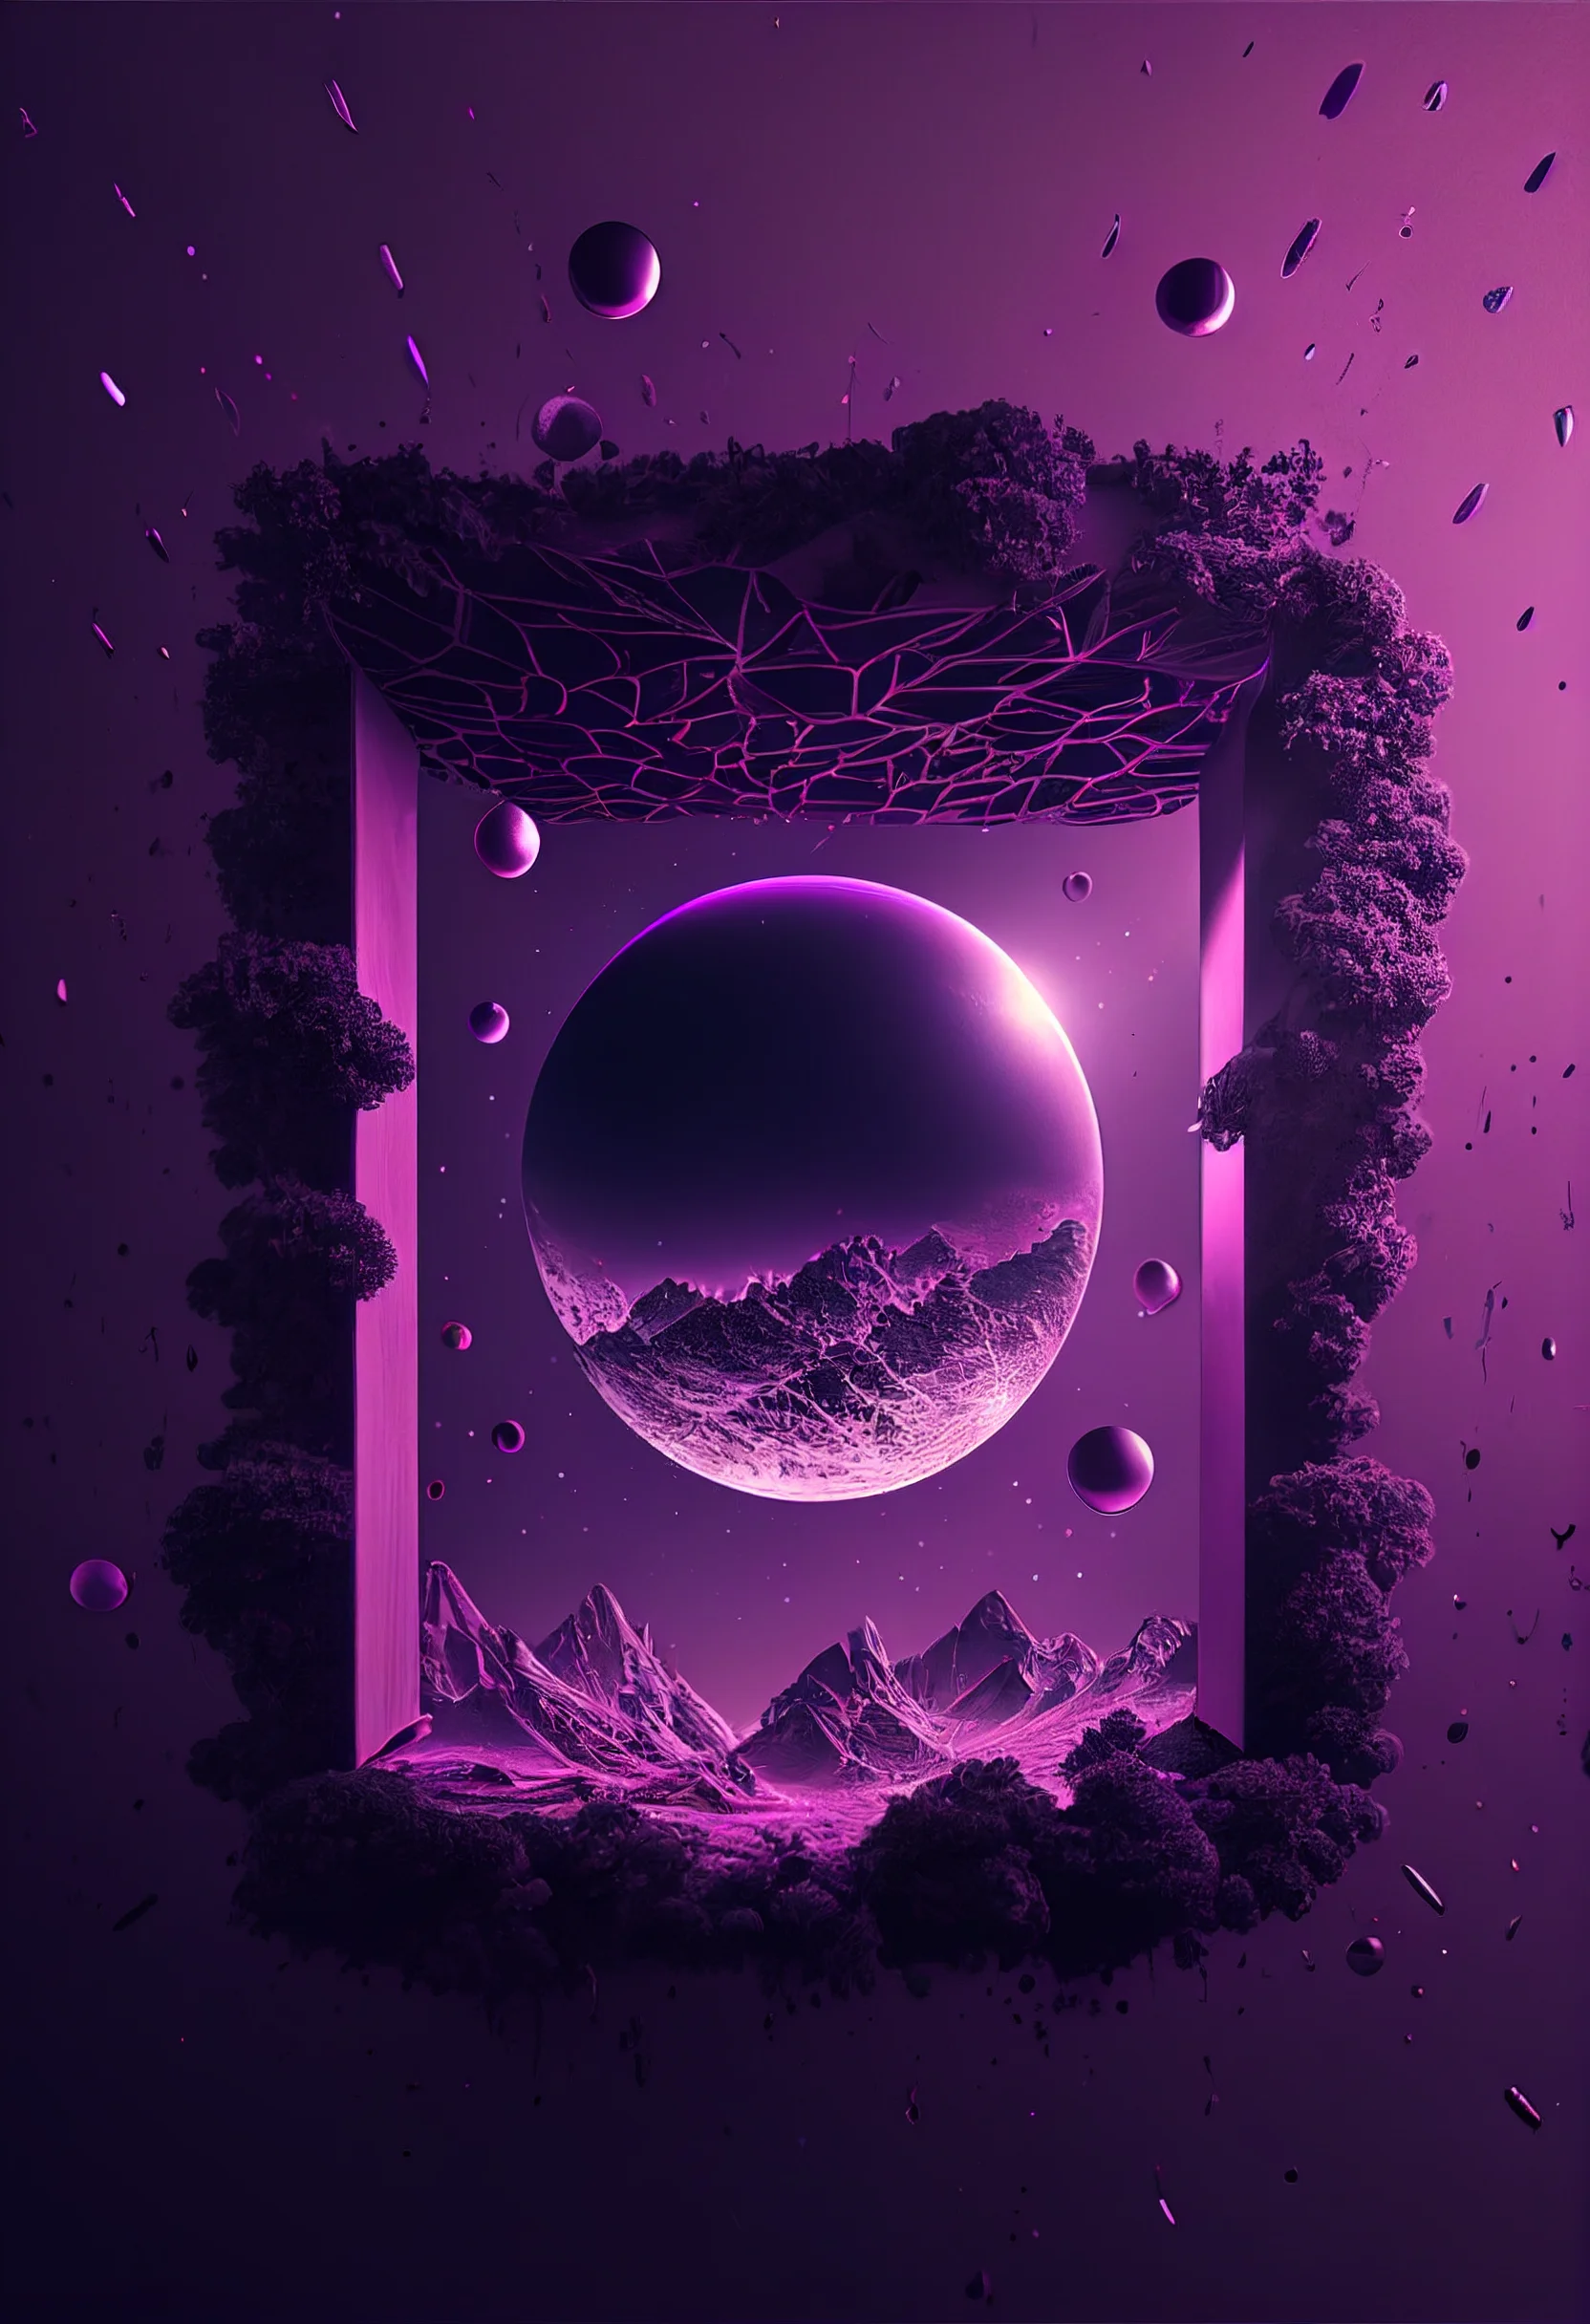 Top 20 Inspirational Purple Aesthetic iPhone Wallpapers for Free 2023